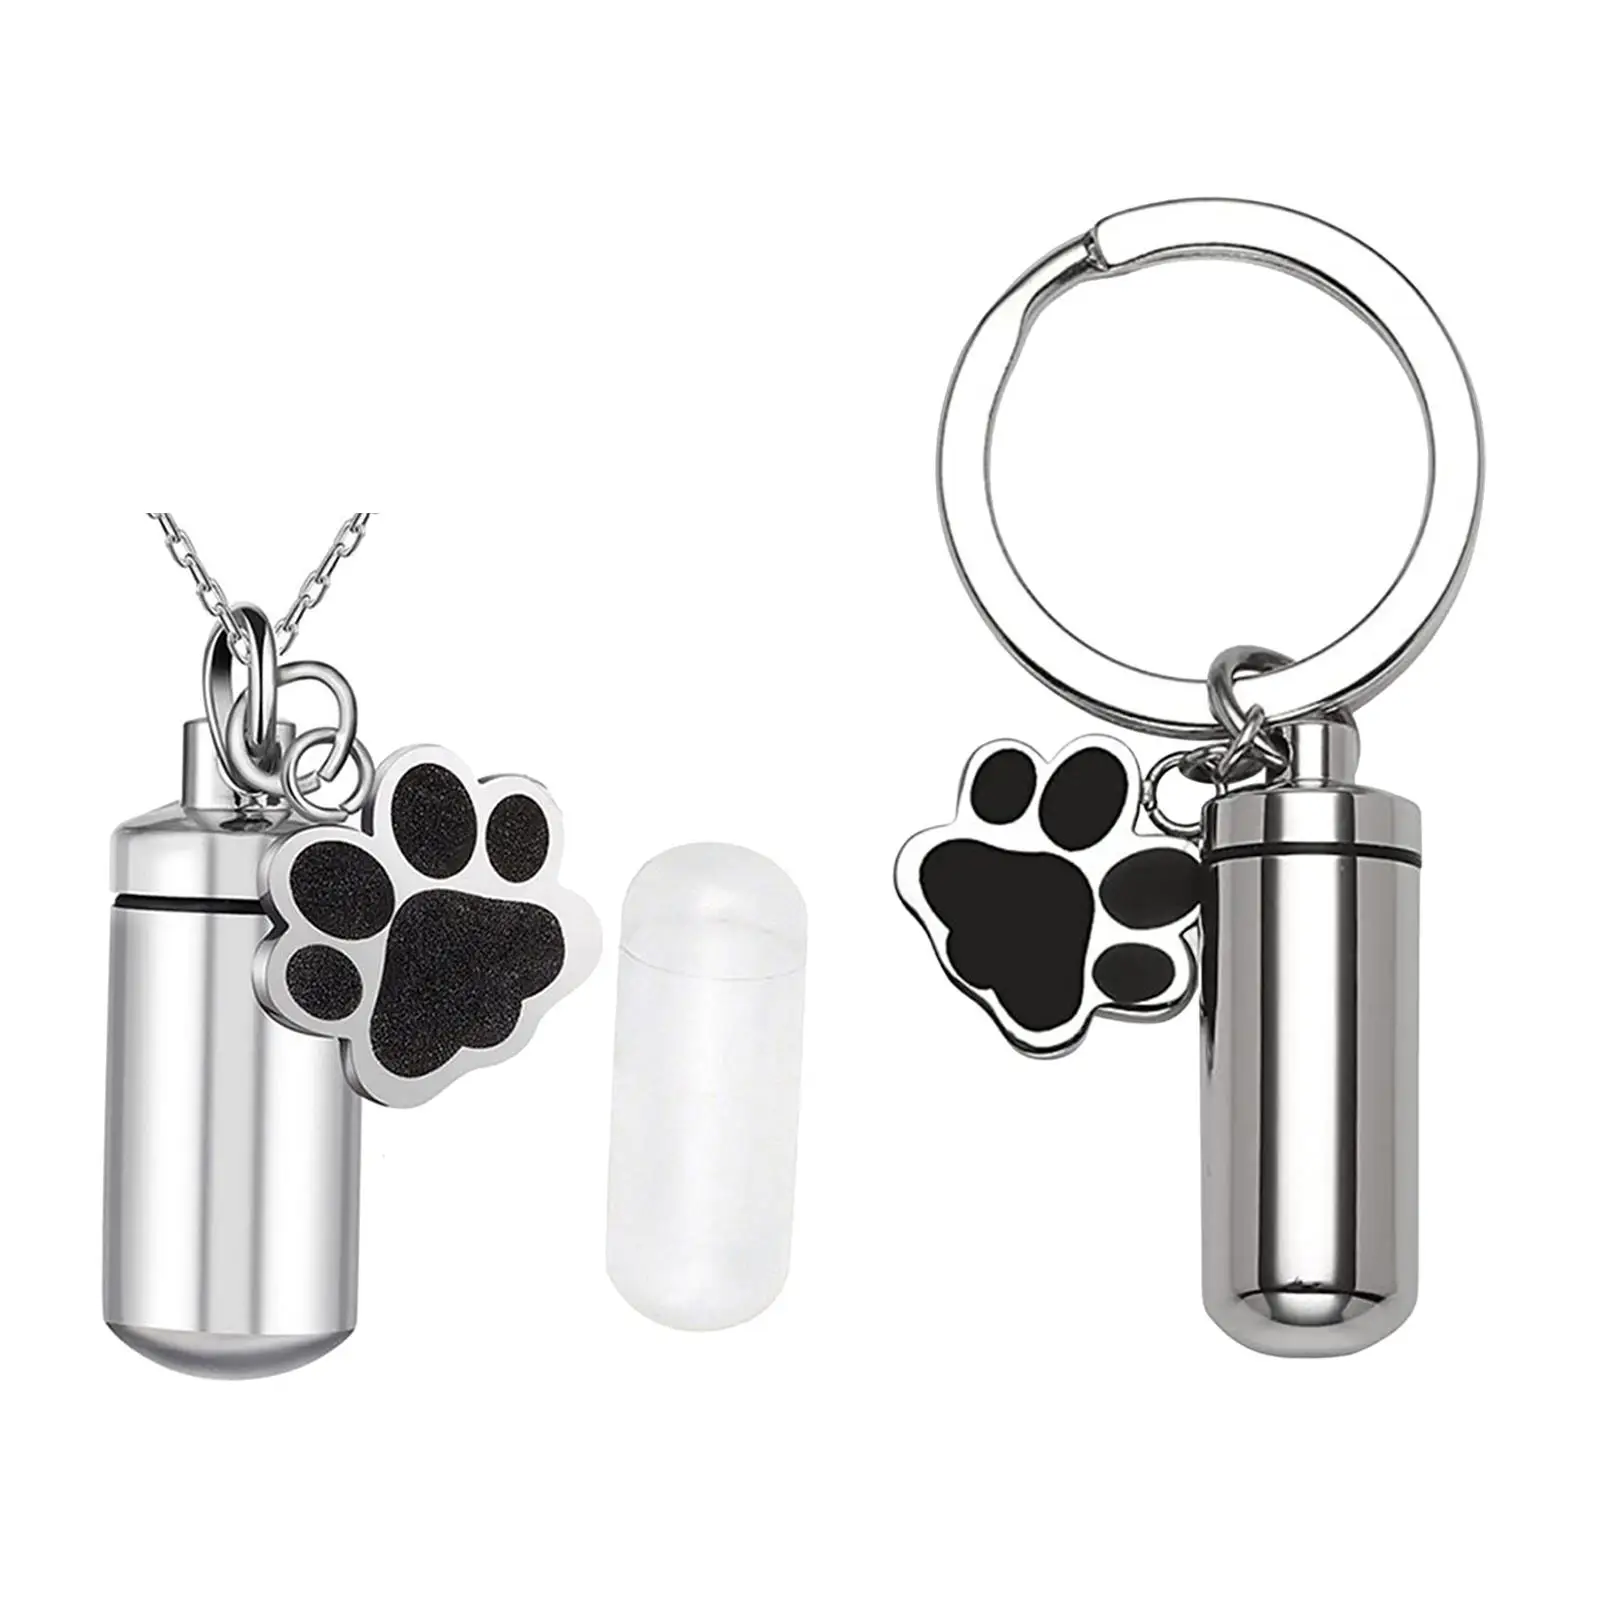 Pet Urn Easy to Use Peace and Comfort Services Pet Supplies with A Paw Pendant Memorable Dog Ash Urns for Dogs and Cats Ashes